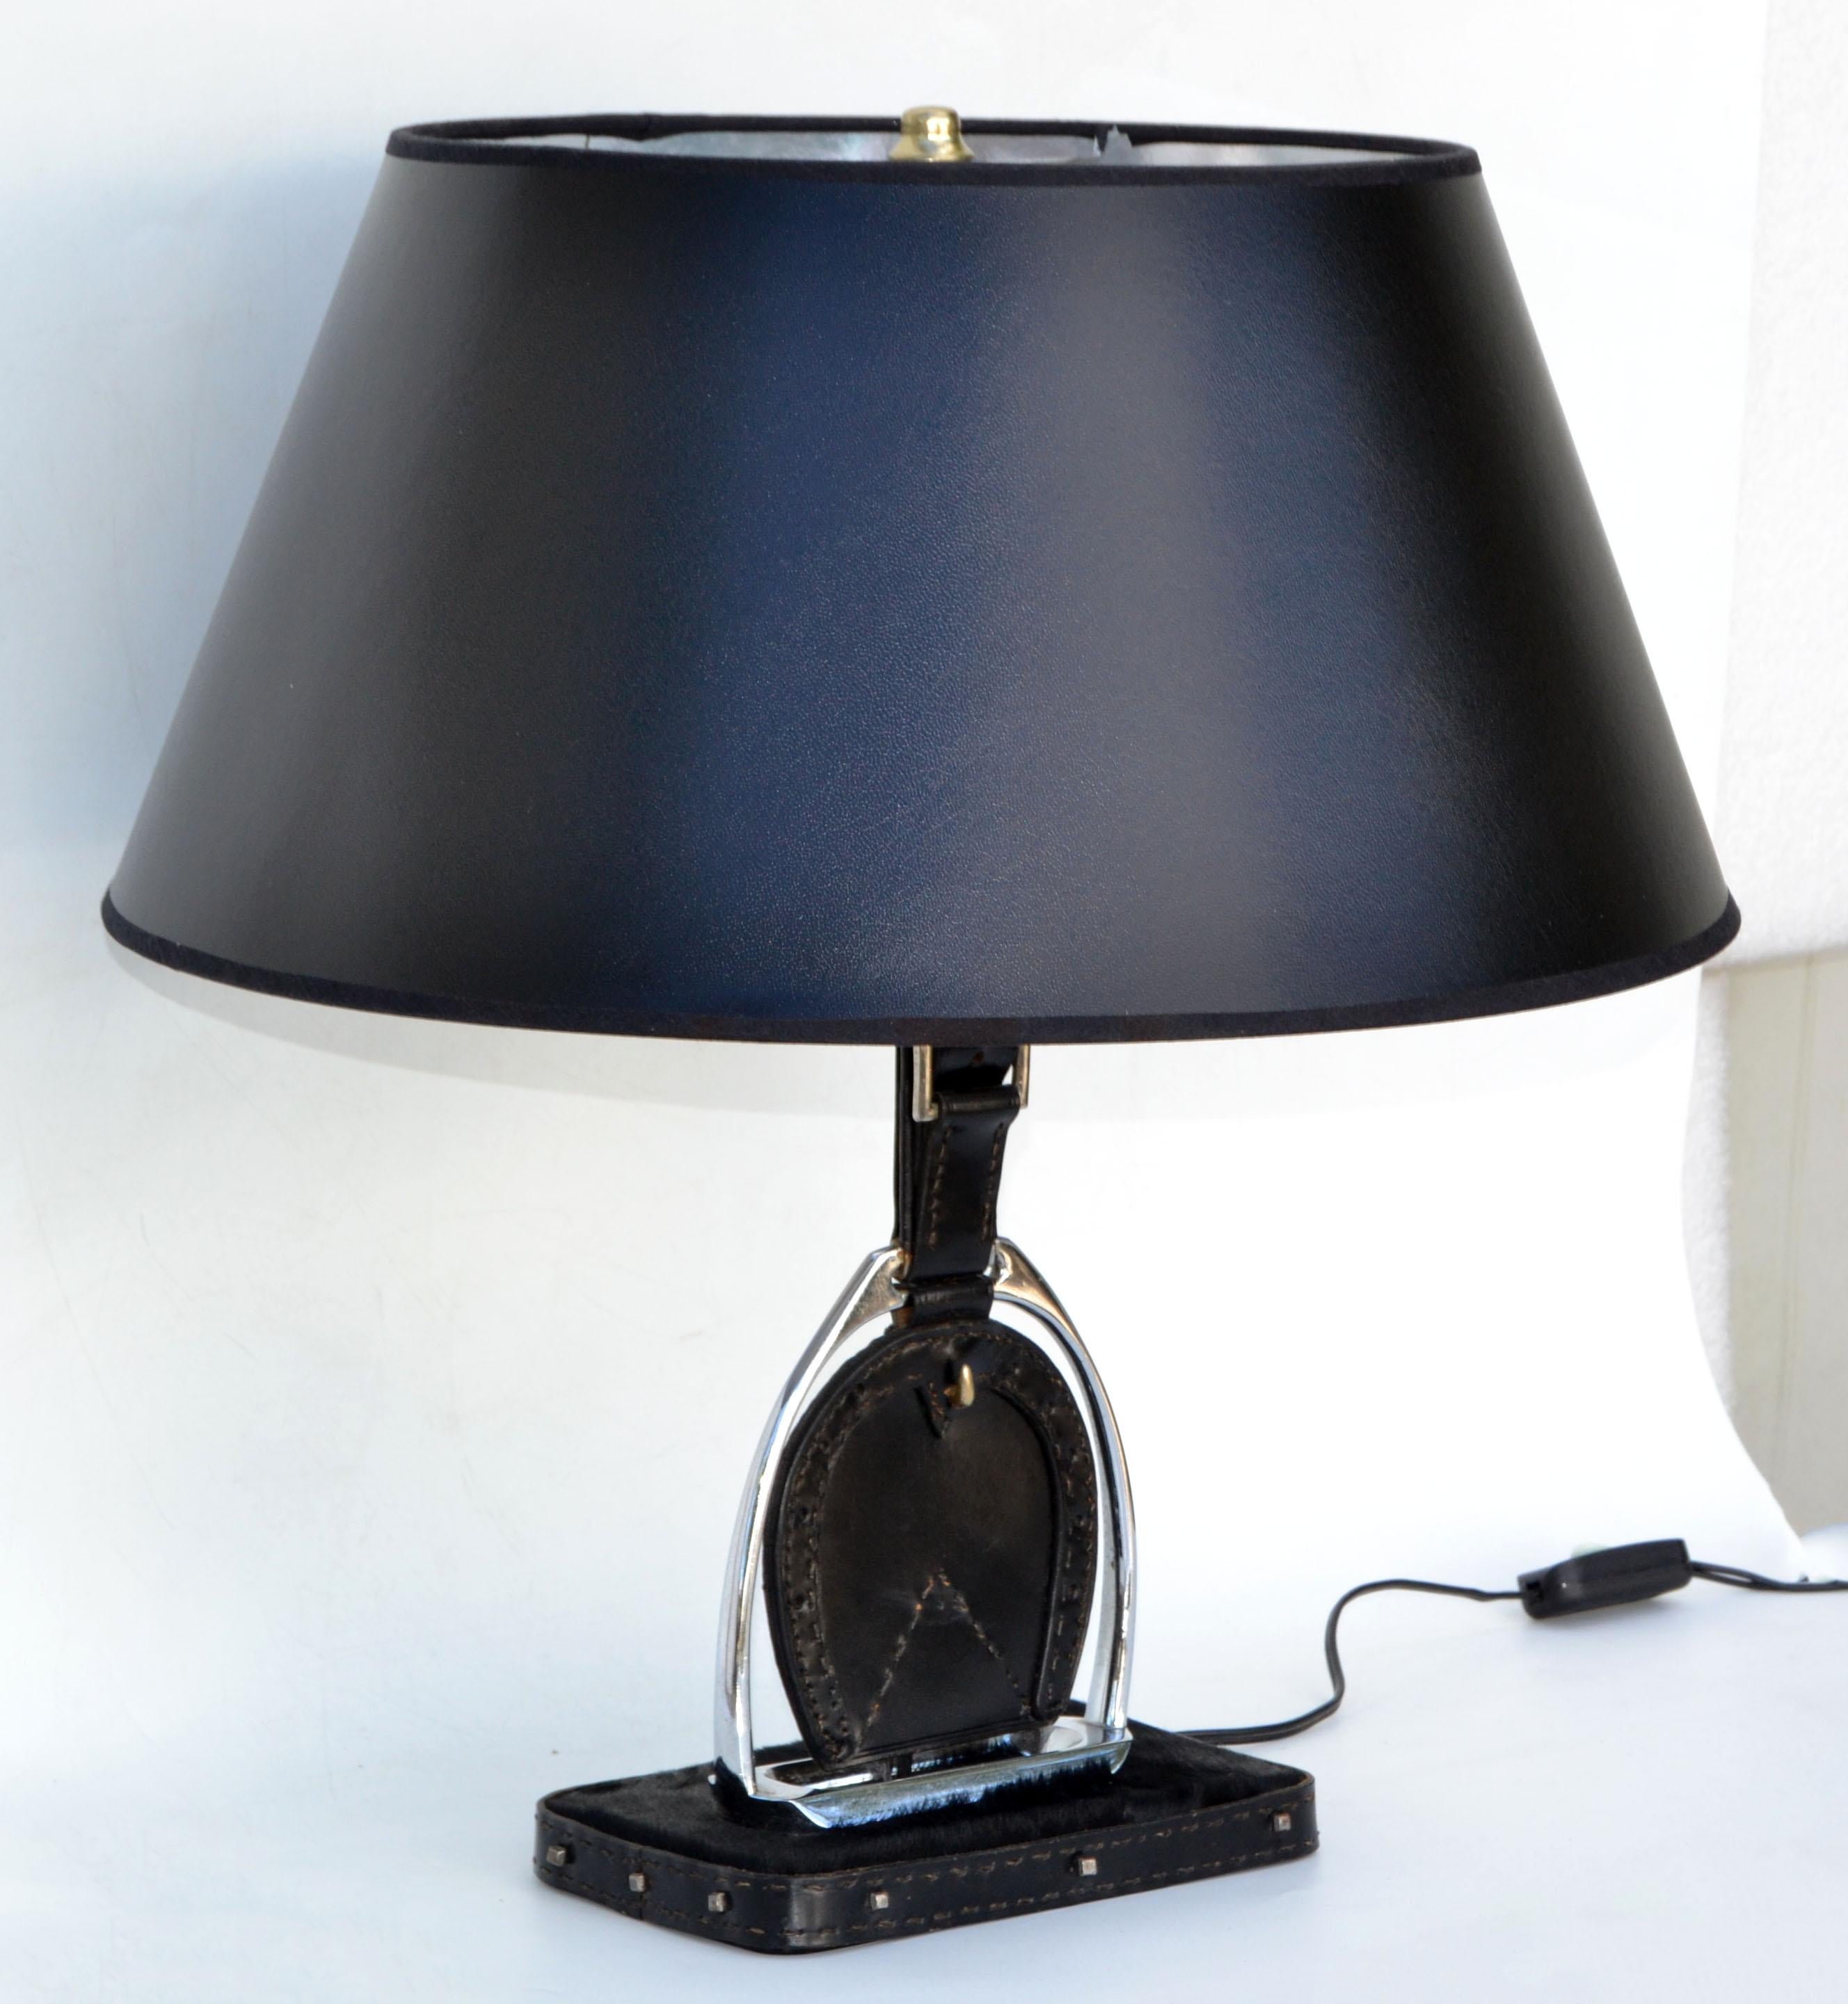 French Jacques Adnet Art Deco horse hair, nickel & saddle stitched leather table lamp made in the 1950s.
In perfect working condition US rewiring and takes 1 light bulb max. 75 watts, or LED bulb.
Shade not included.
Measures: height to top of